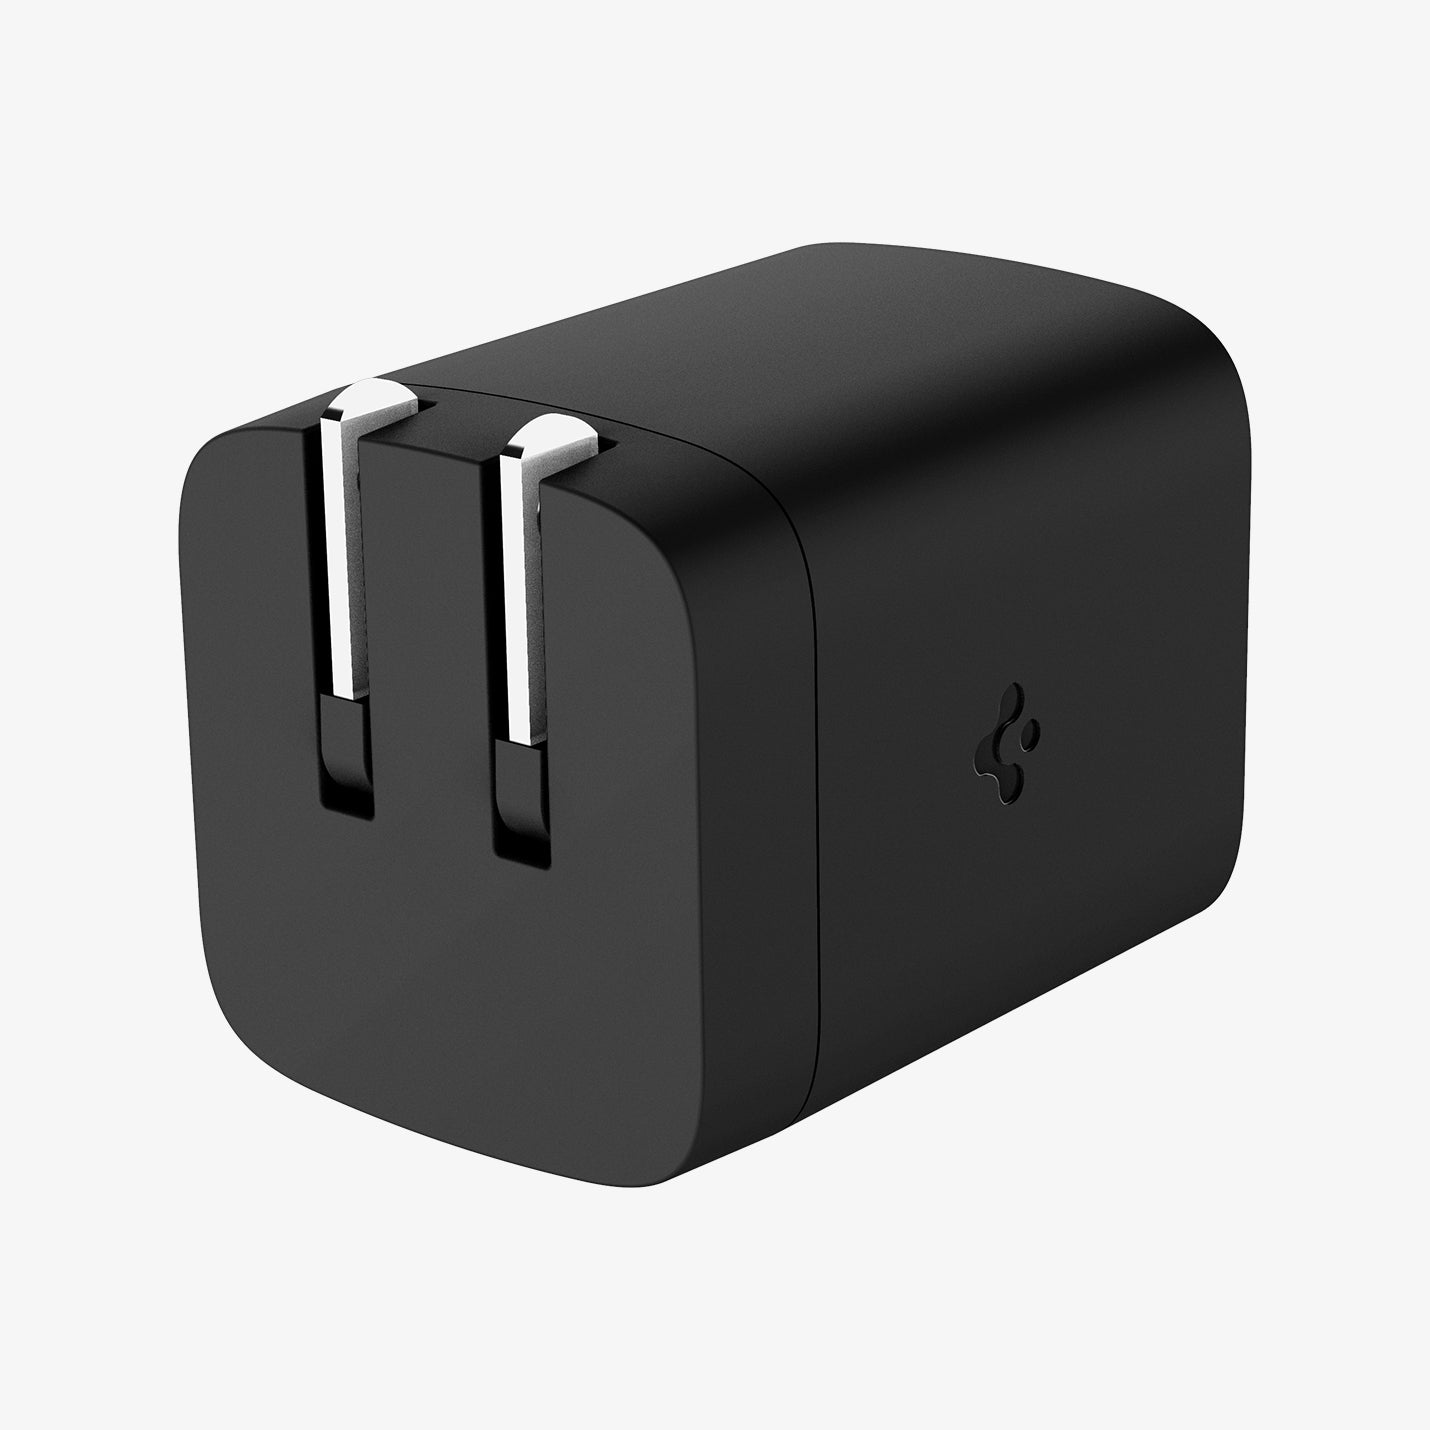 ACH05160 - ArcStation™ Pro GaN 652 Dual USB-C Wall Charger PE2204 in Midnight Black showing both sides and the bottom with power connector folded in the wall charger